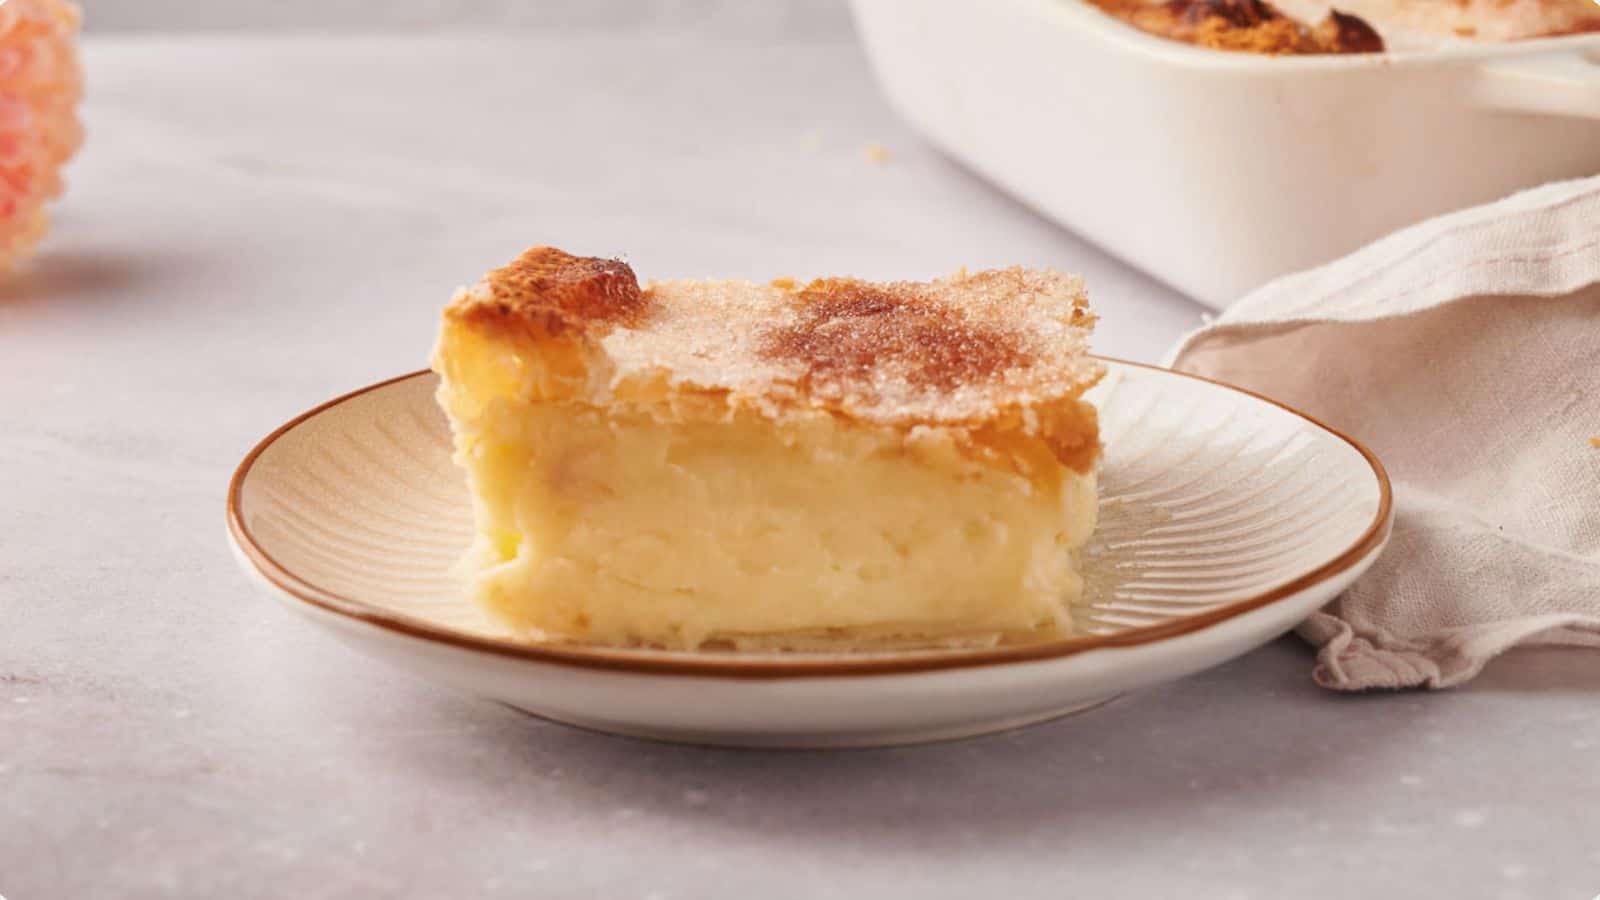 <p>An intriguing blend of cultures, sopapilla cheesecake brings the flaky delight of sopapillas together with the creamy decadence of cheesecake. It’s a fusion that captures the essence of comfort and flavor.<br><strong>Get the Recipe: </strong><a href="https://www.splashoftaste.com/sopapilla-cheesecake/?utm_source=msn&utm_medium=page&utm_campaign=msn">Sopapilla Cheesecake</a></p>